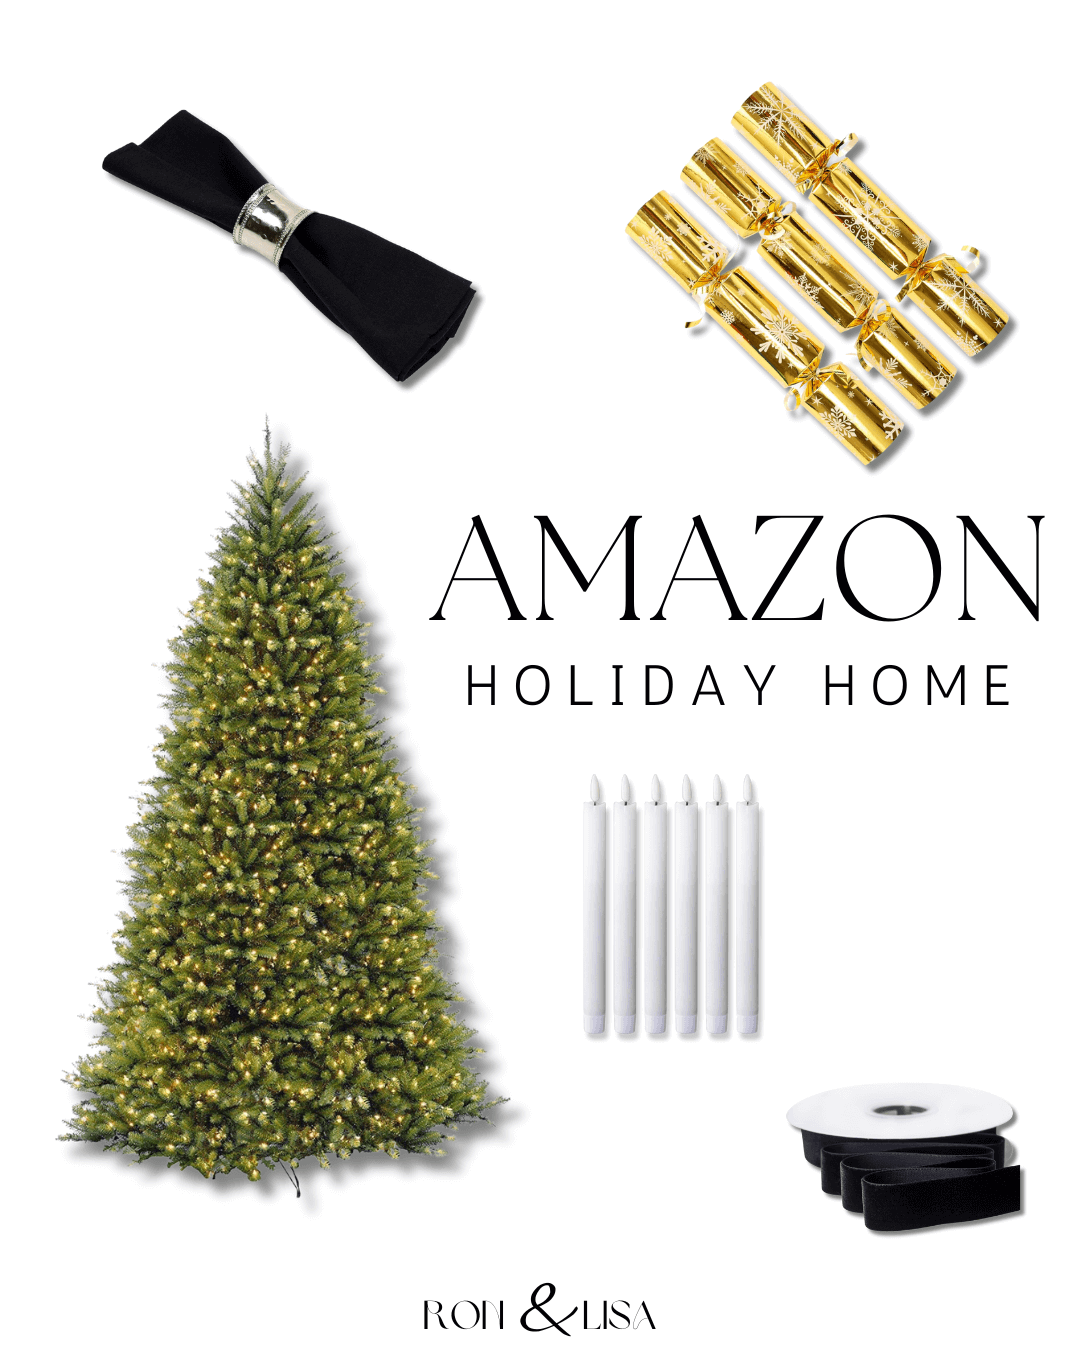 Amazon Holiday Home Must-Haves